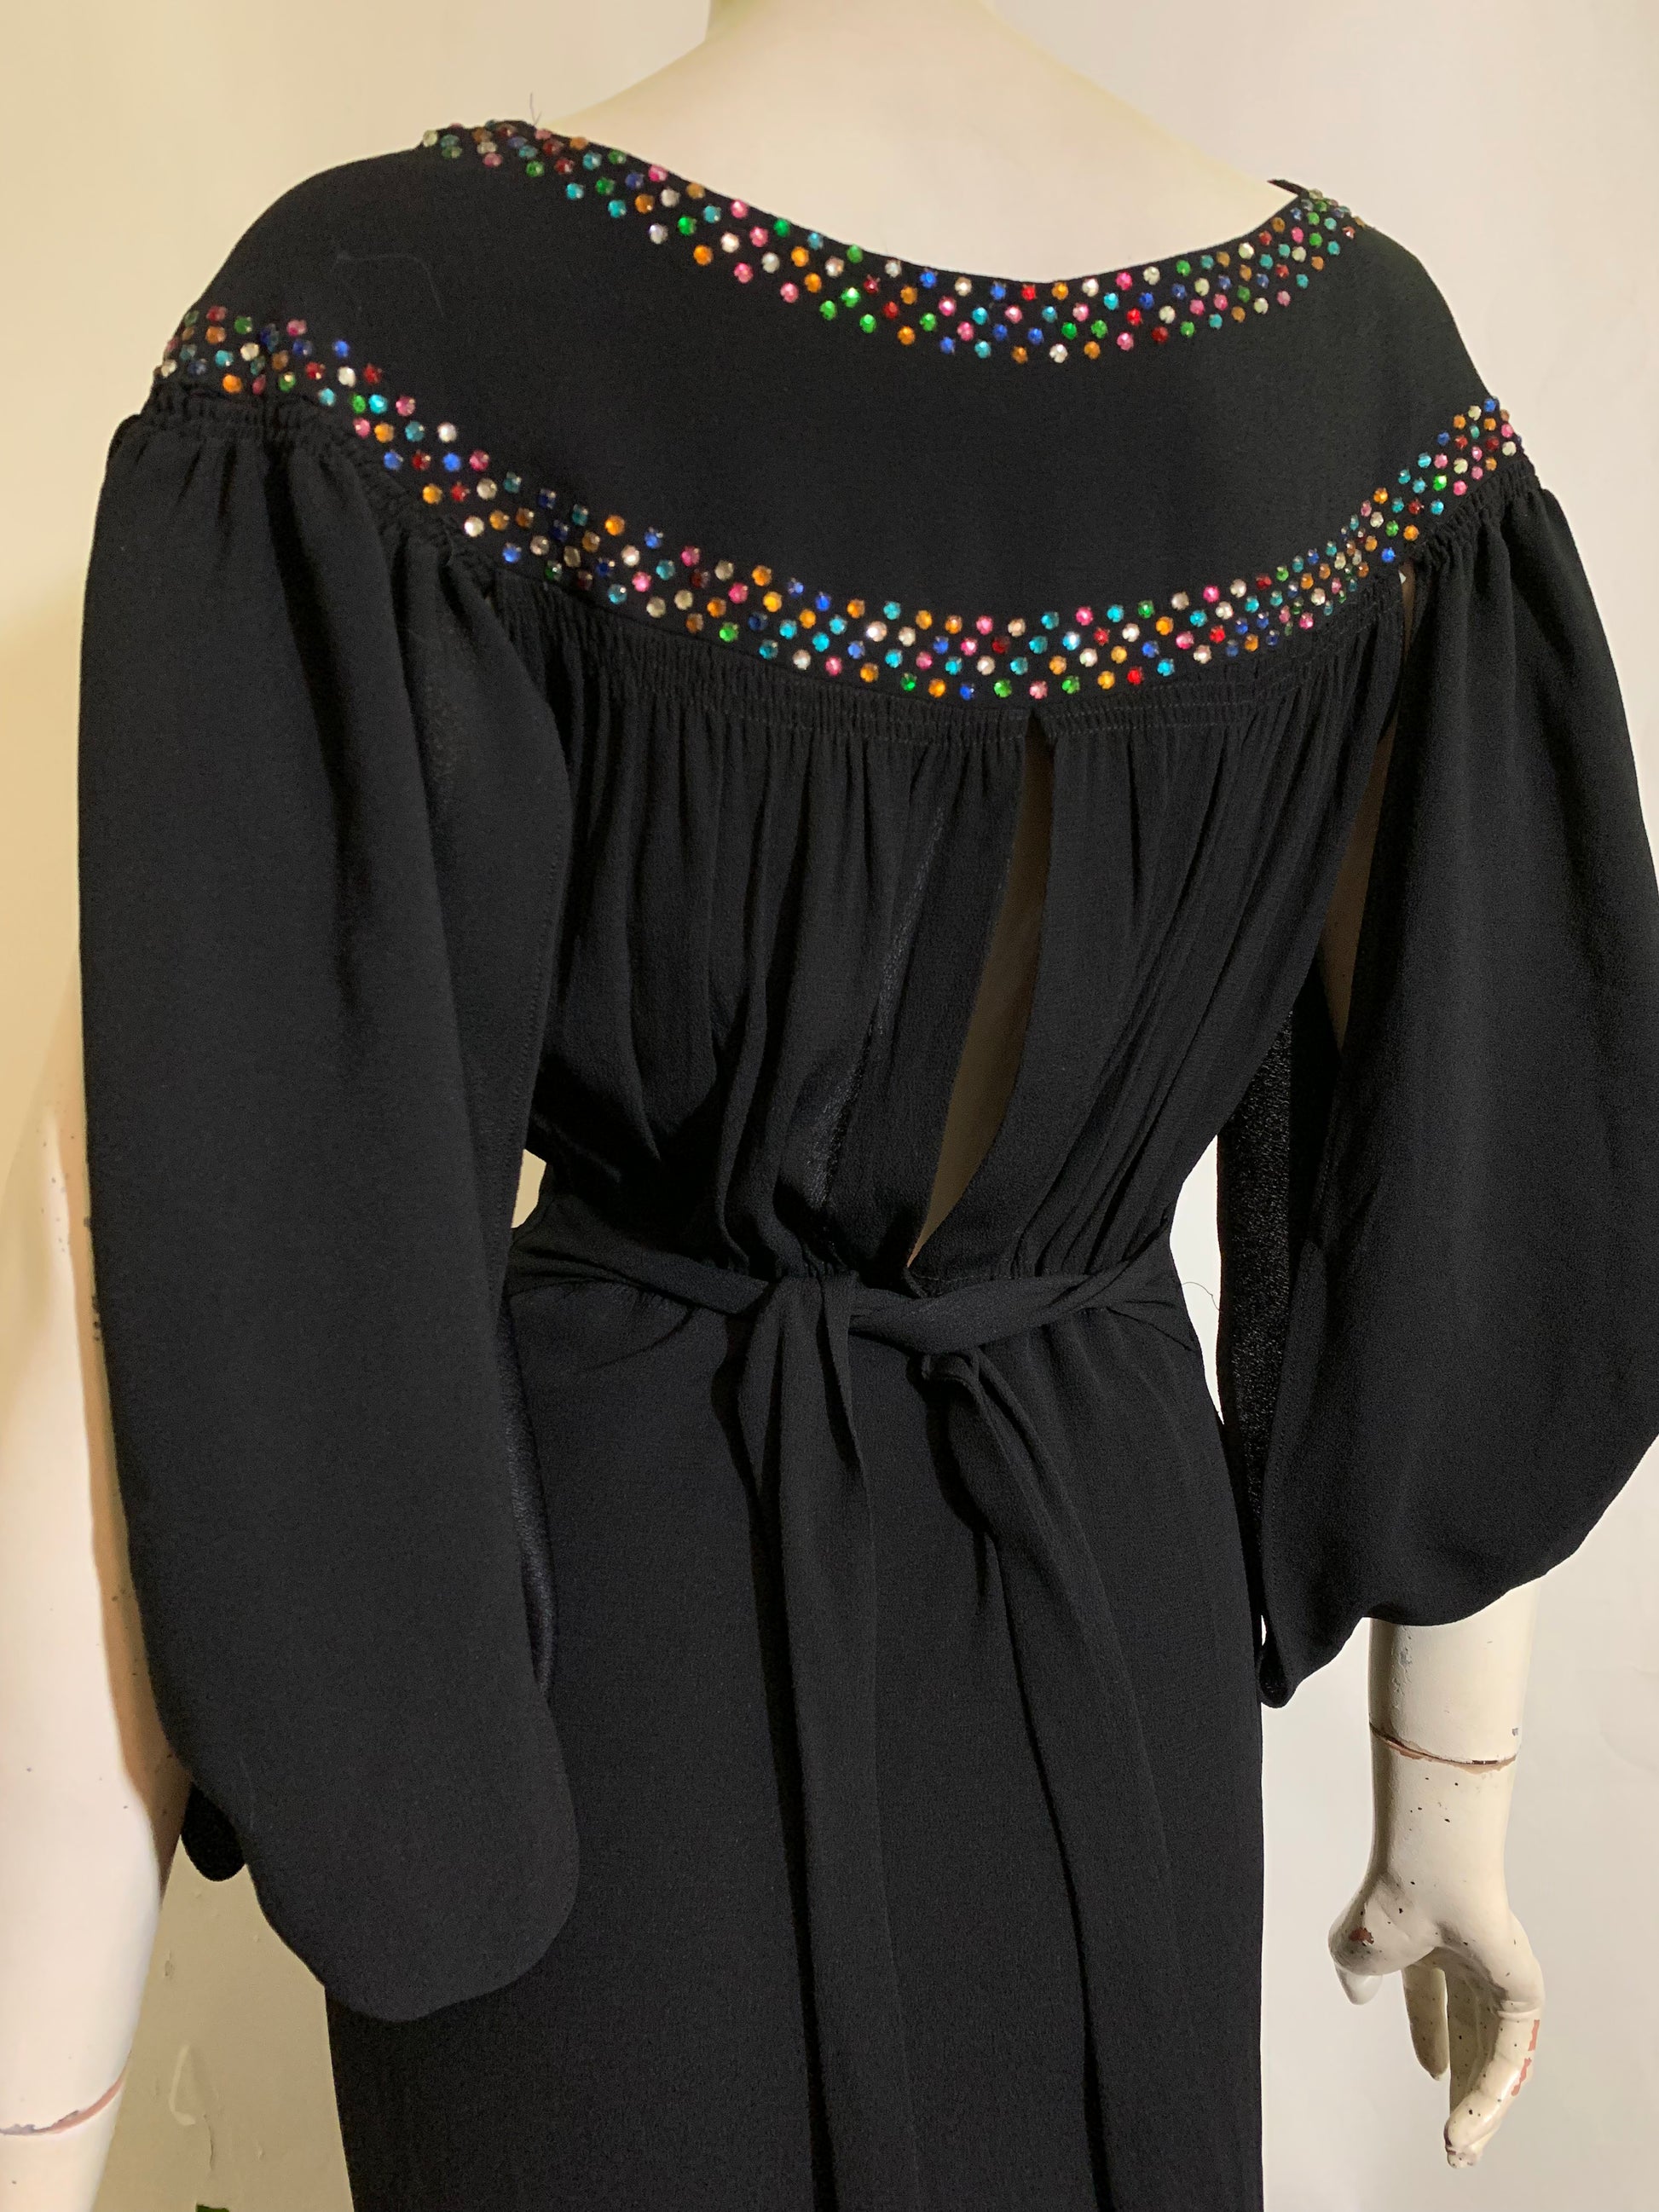 RESERVED Rainbow Vamp! Black Crepe Evening Gown with Rainbow Rhinestones  and Side Slit Sleeves and Back circa 1930s